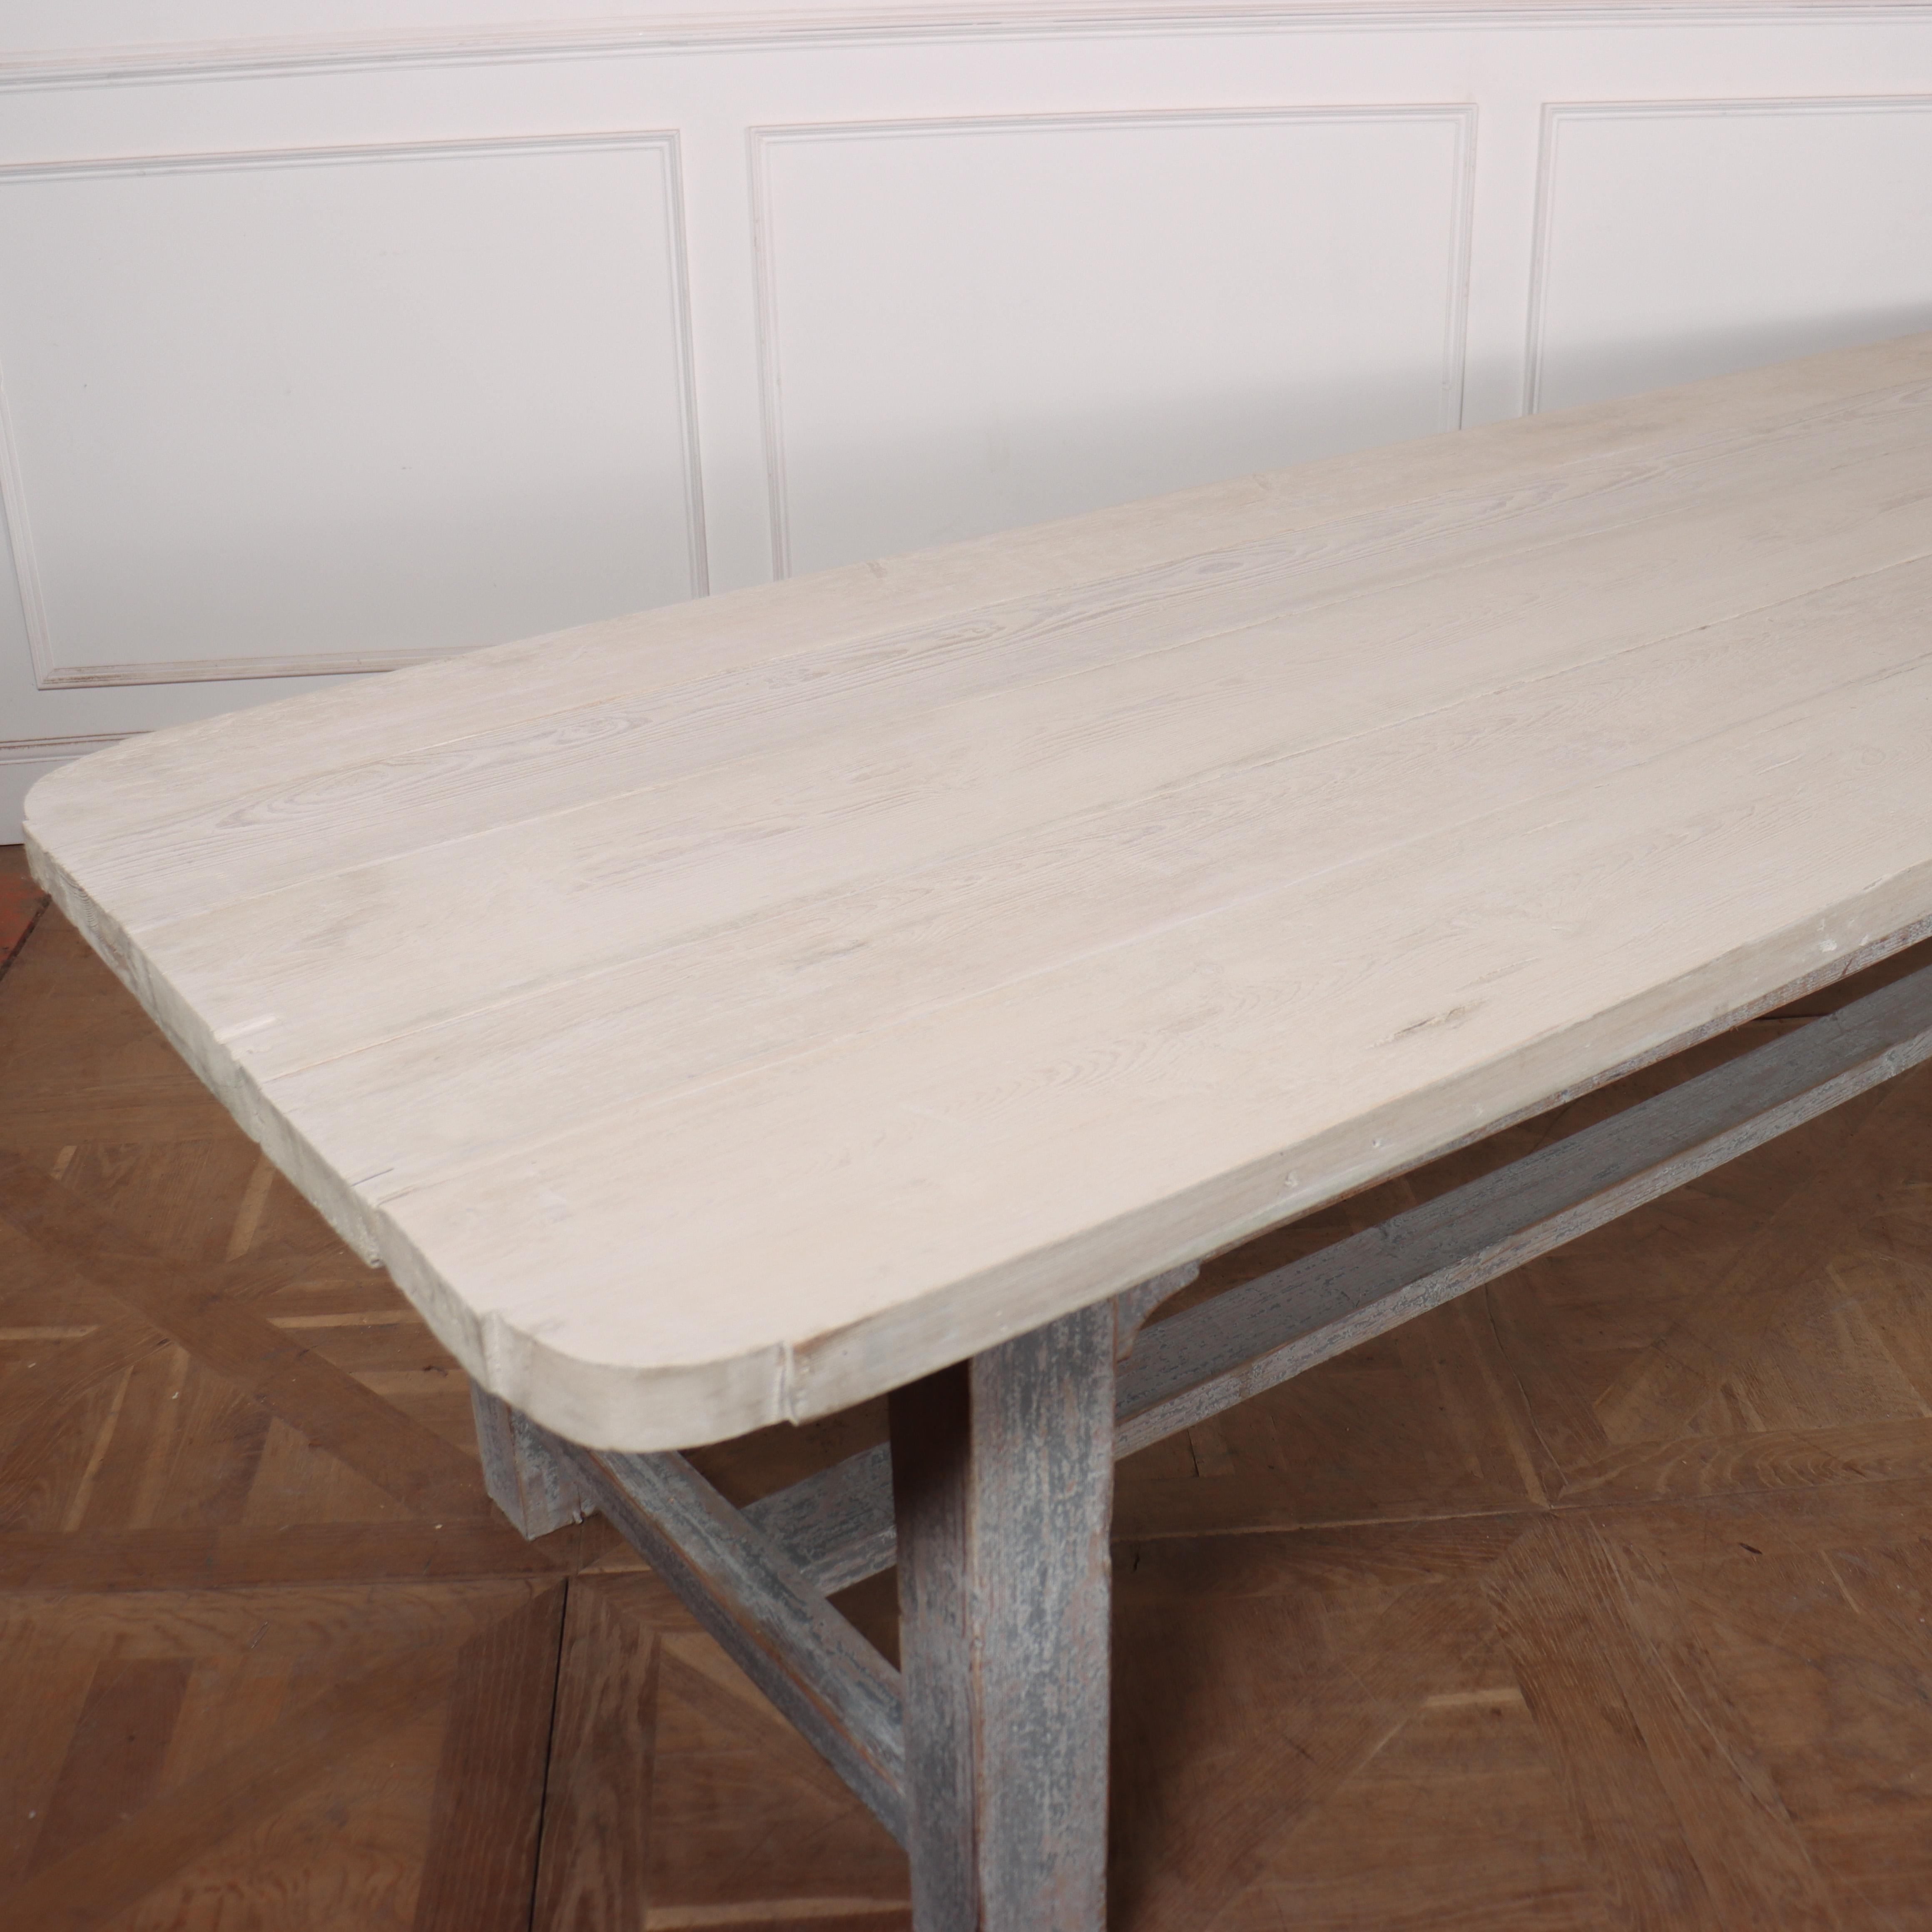 Huge French painted farmhouse table with a thick scrubbed and bleached pine top. 1840.

64.5cm clearance.

Reference: 8107

Dimensions
136.5 inches (347 cms) Wide
41 inches (104 cms) Deep
31.5 inches (80 cms) High